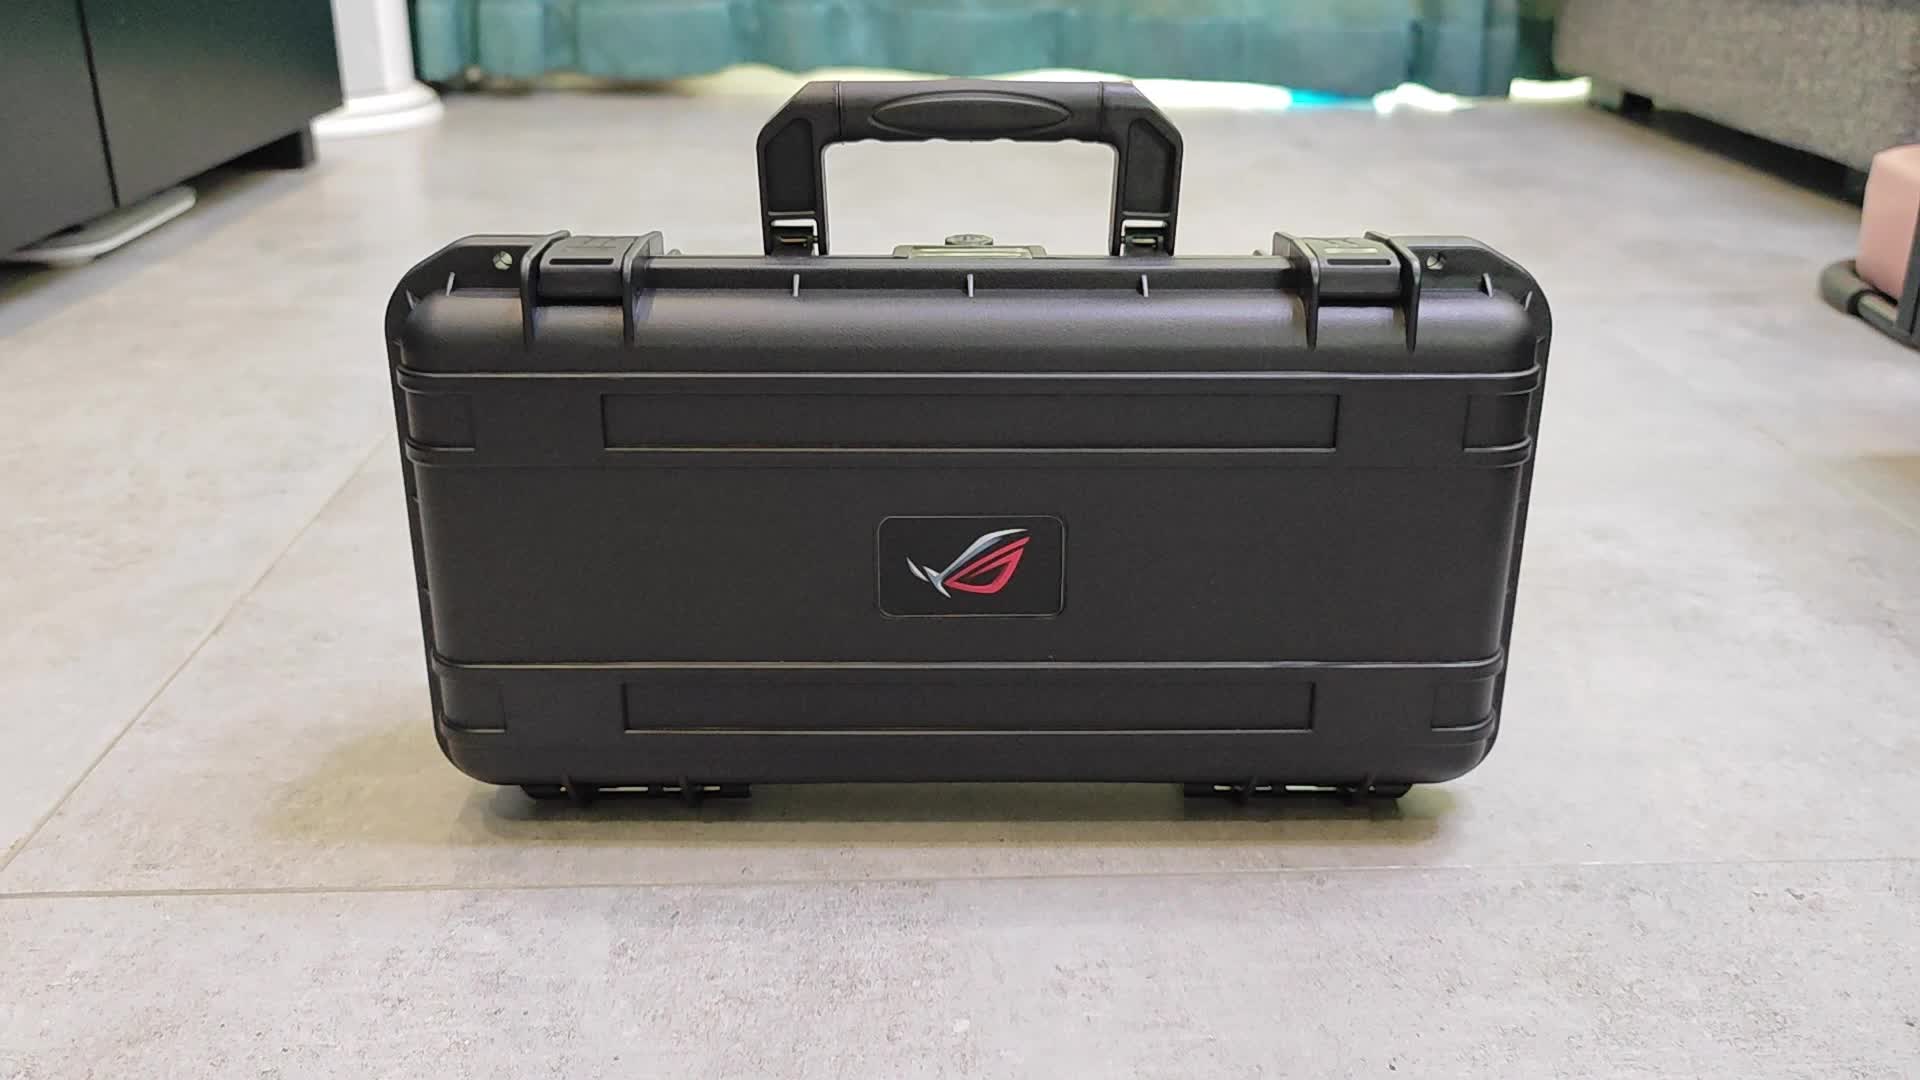 YipuVR Hard Carrying Case for ASUS ROG Ally, Waterproof Storage